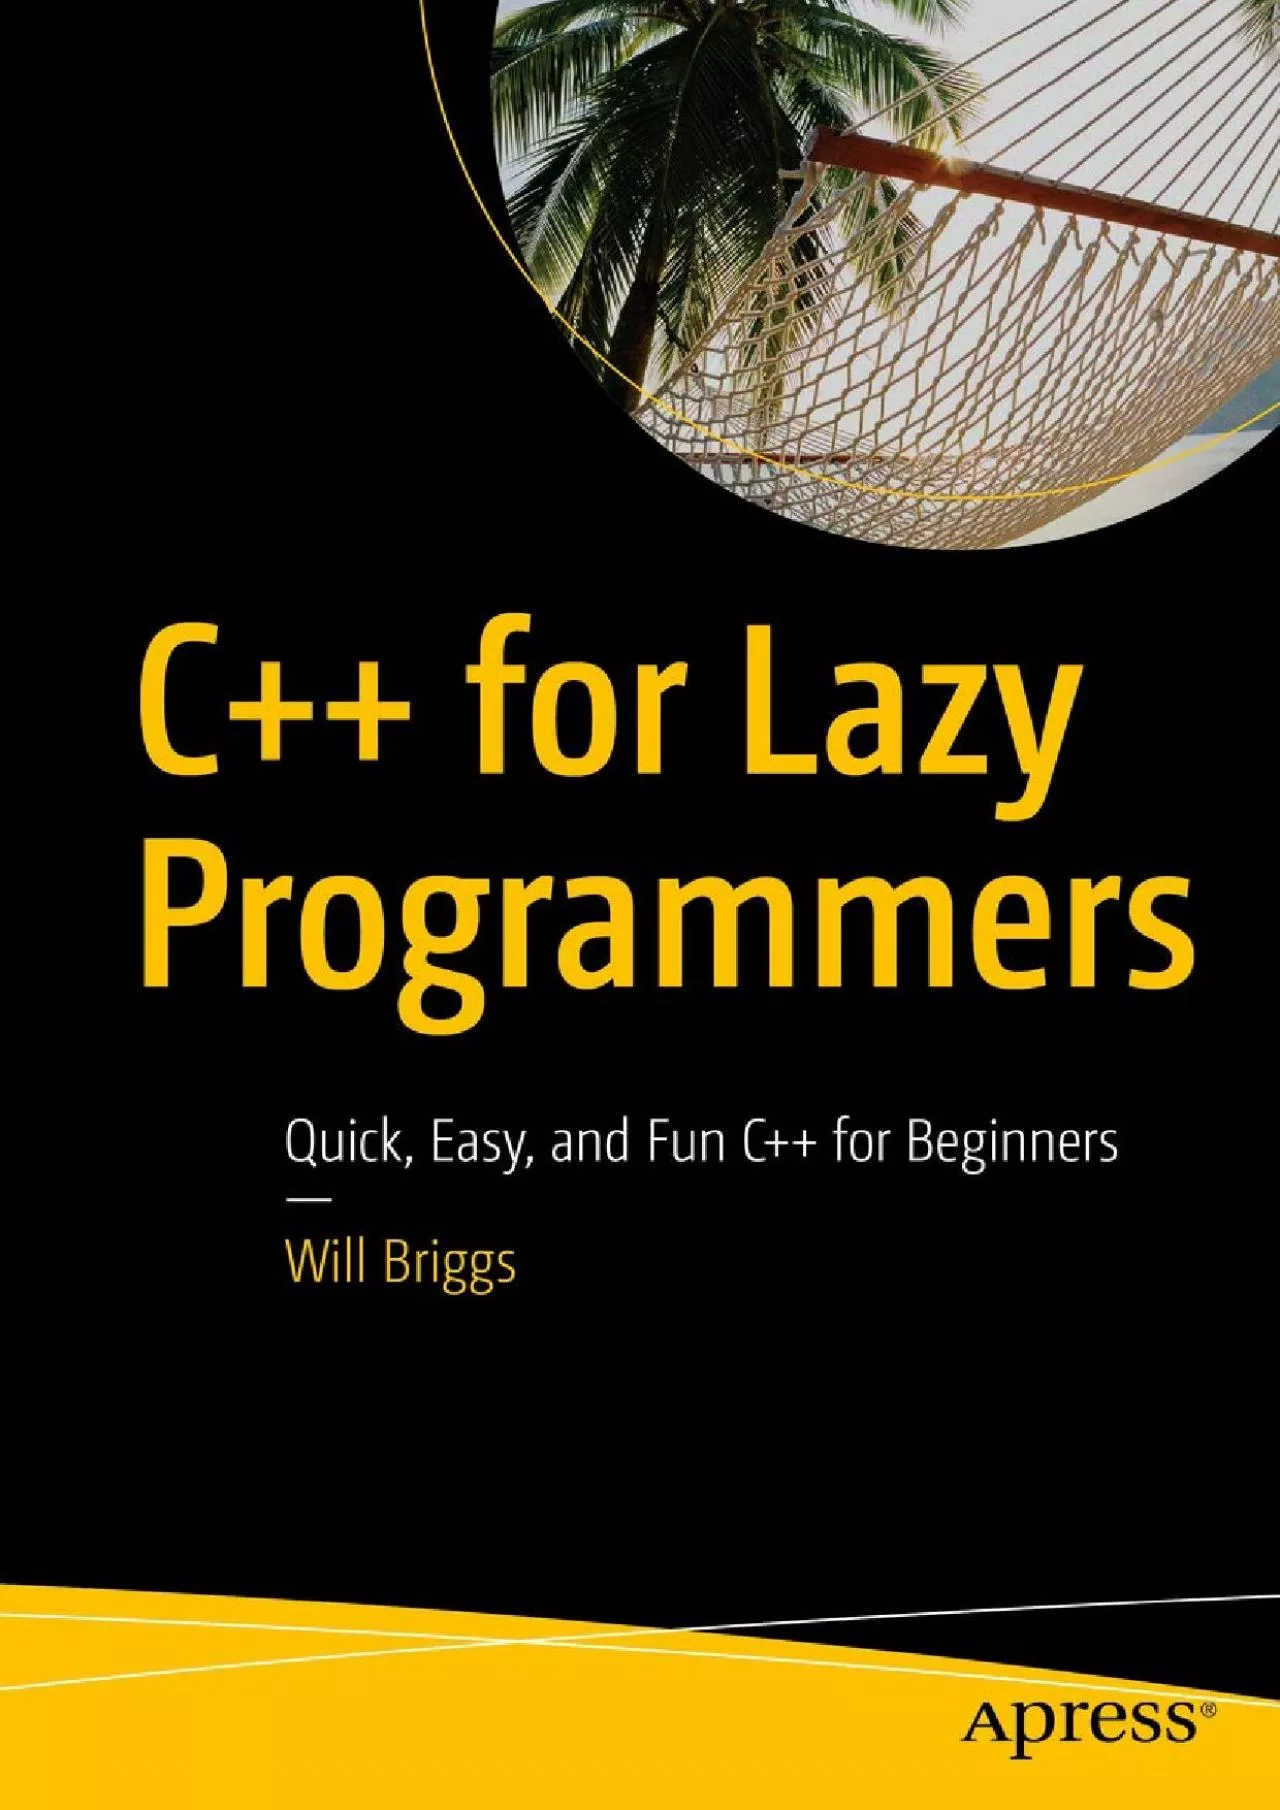 [READING BOOK]-C++ for Lazy Programmers: Quick, Easy, and Fun C++ for Beginners